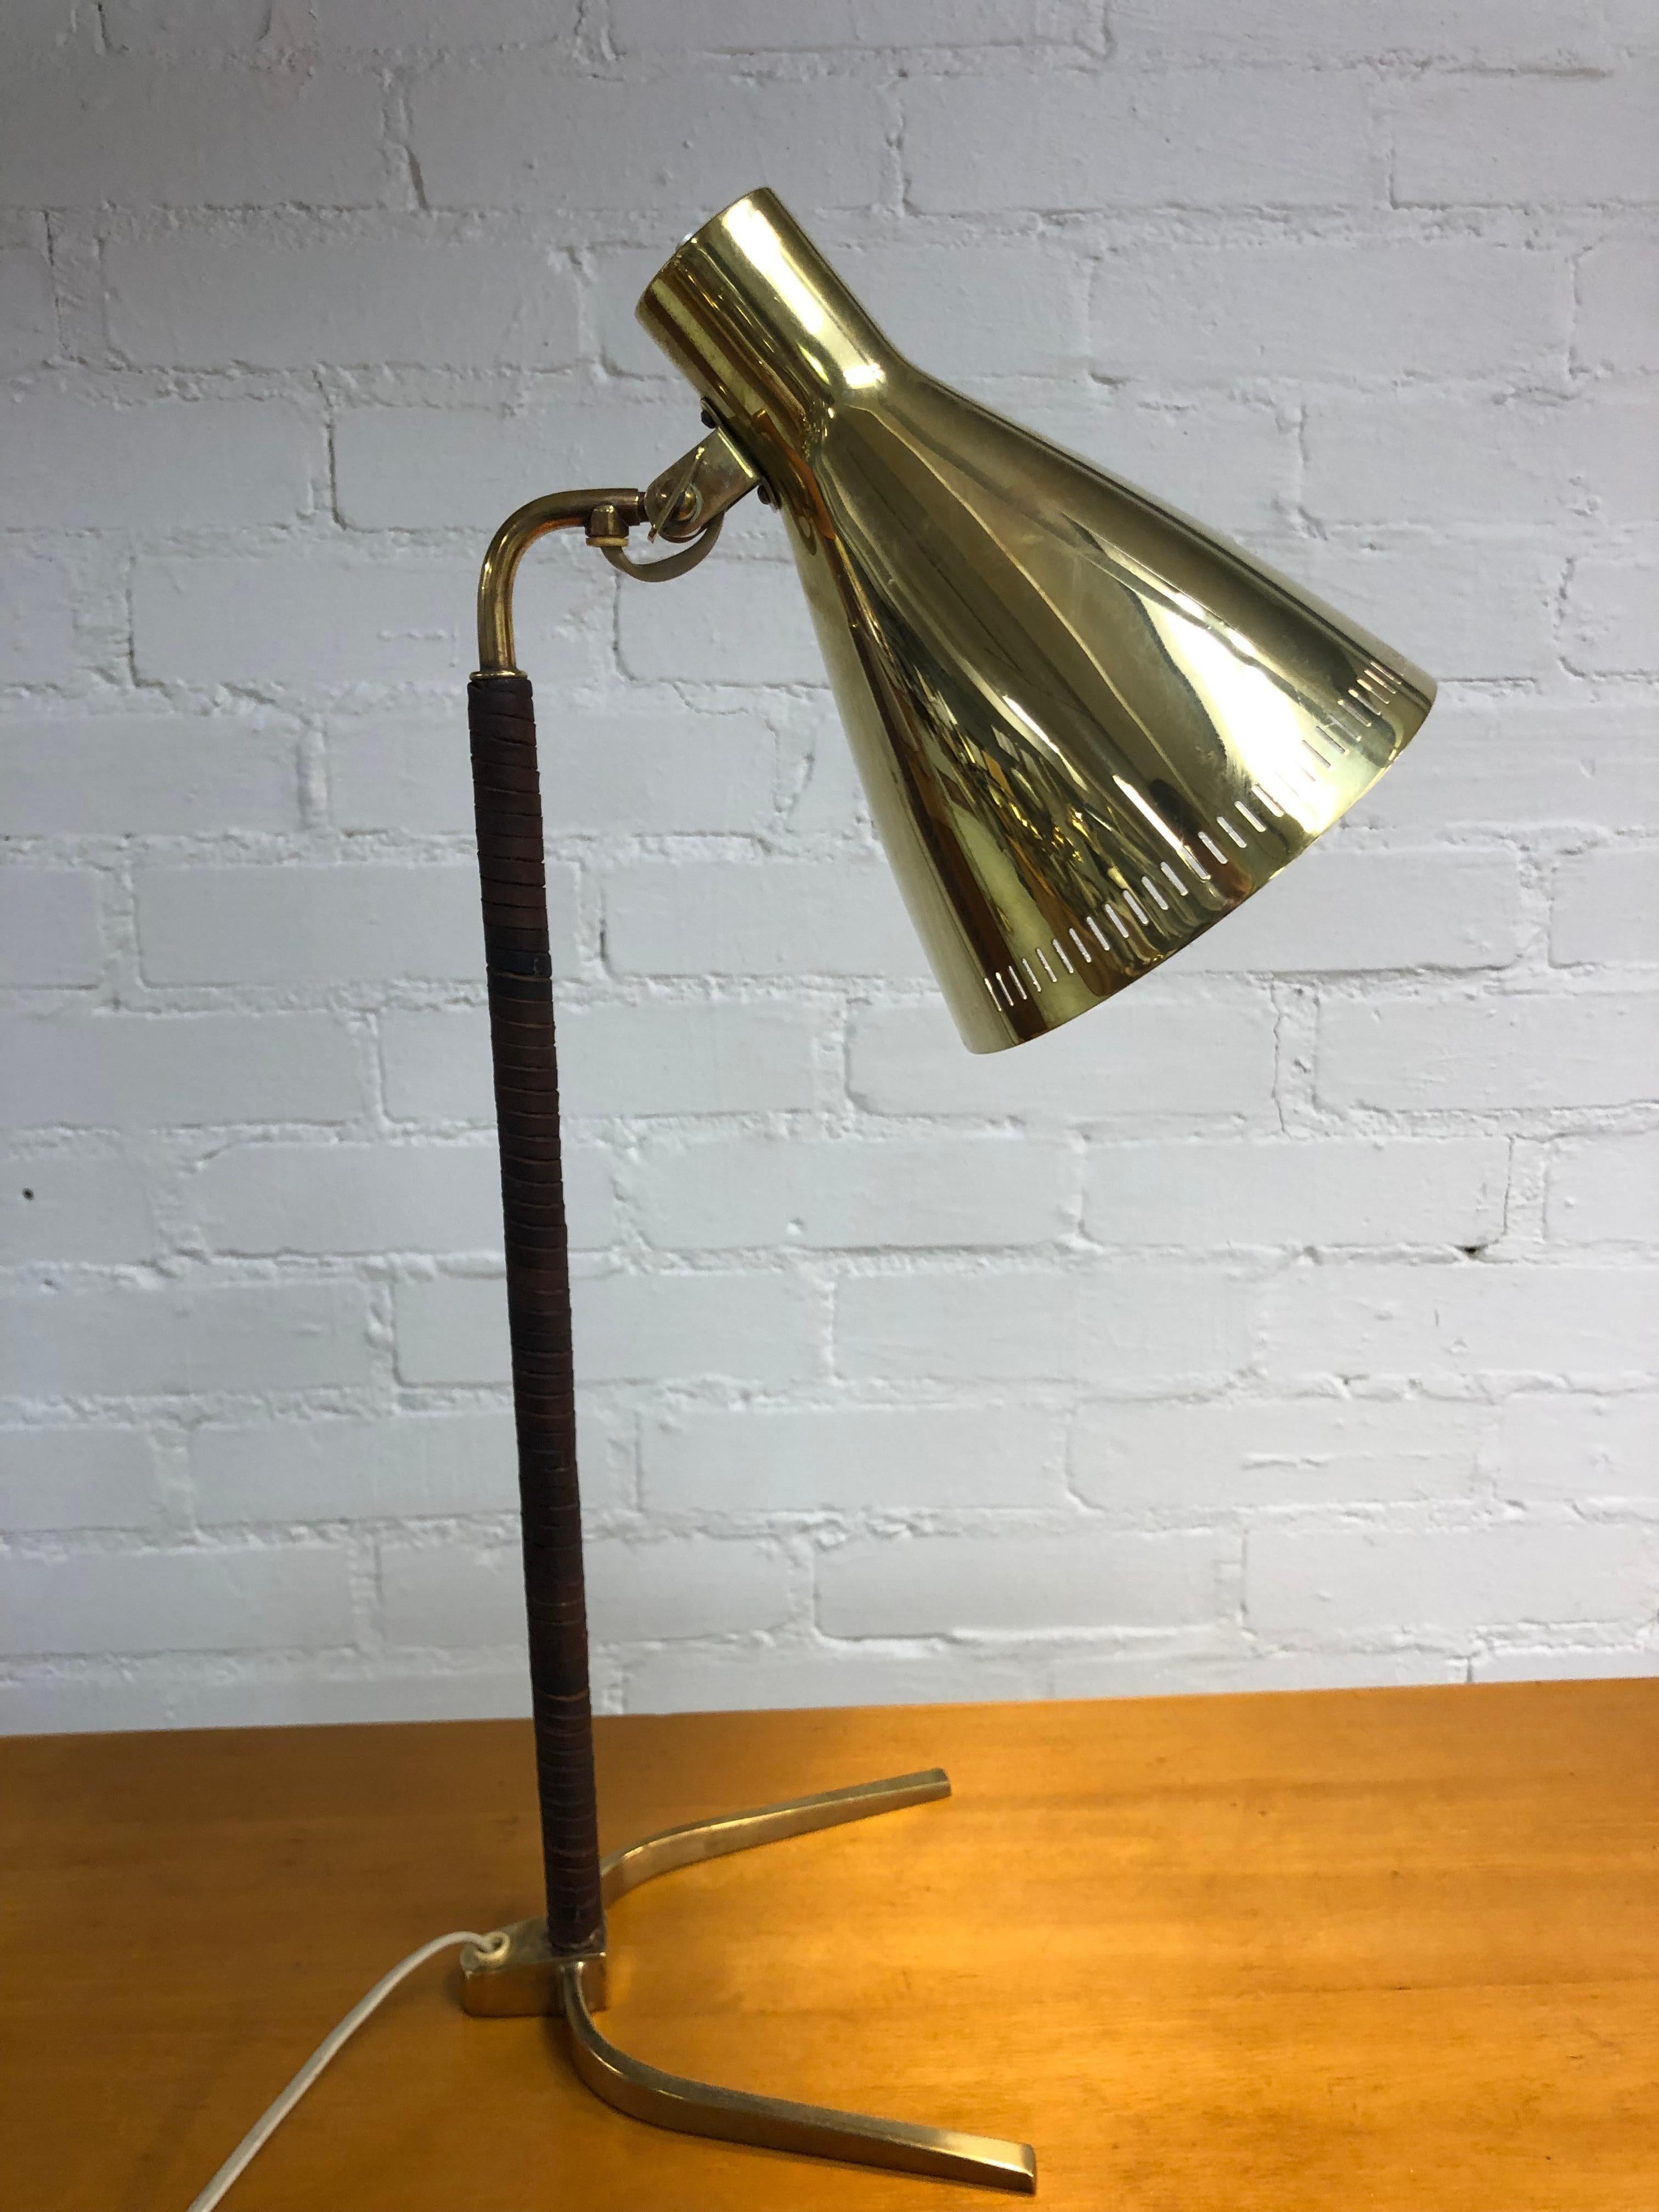 Beautifully sustained table lamp model 9224, also known as the 